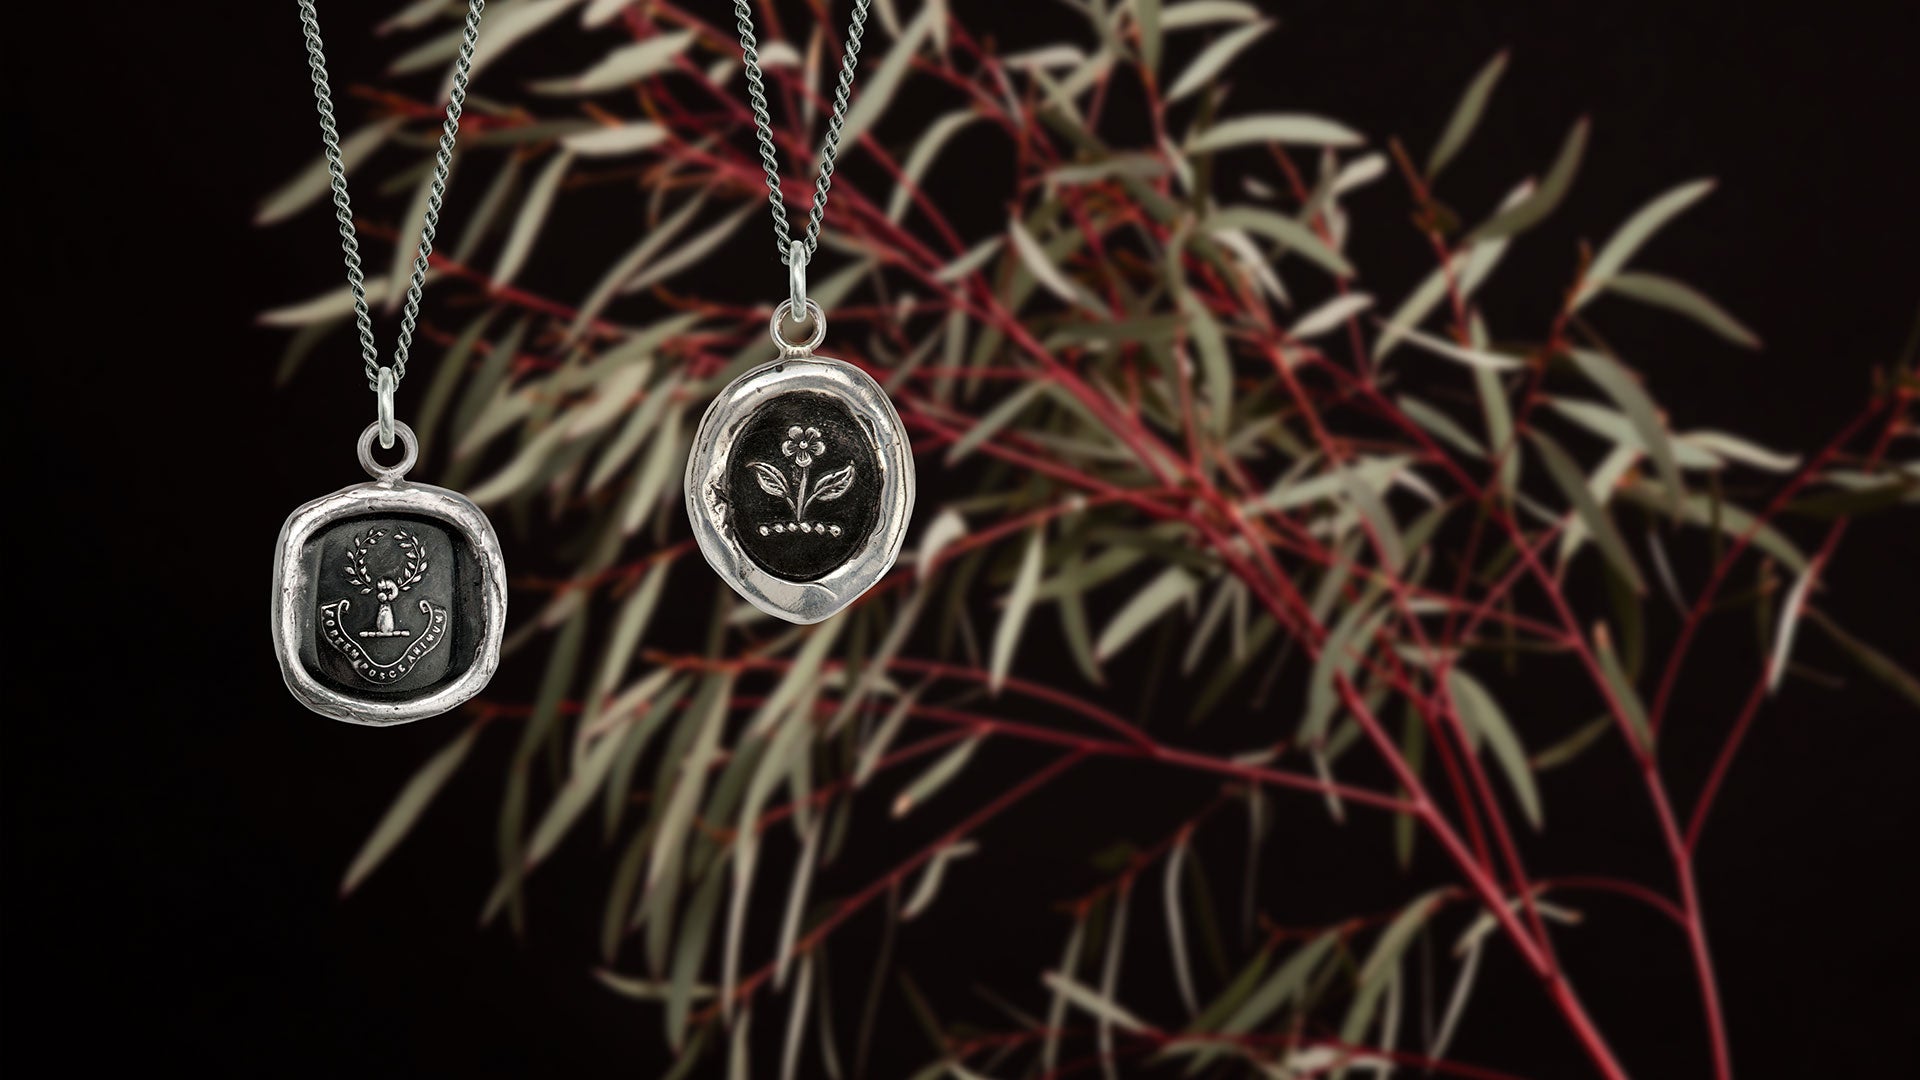 Meaningful Handcrafted Talisman Jewelry Pyrrha - rich with meaning our symbolic talismans empower celebrate and inspire